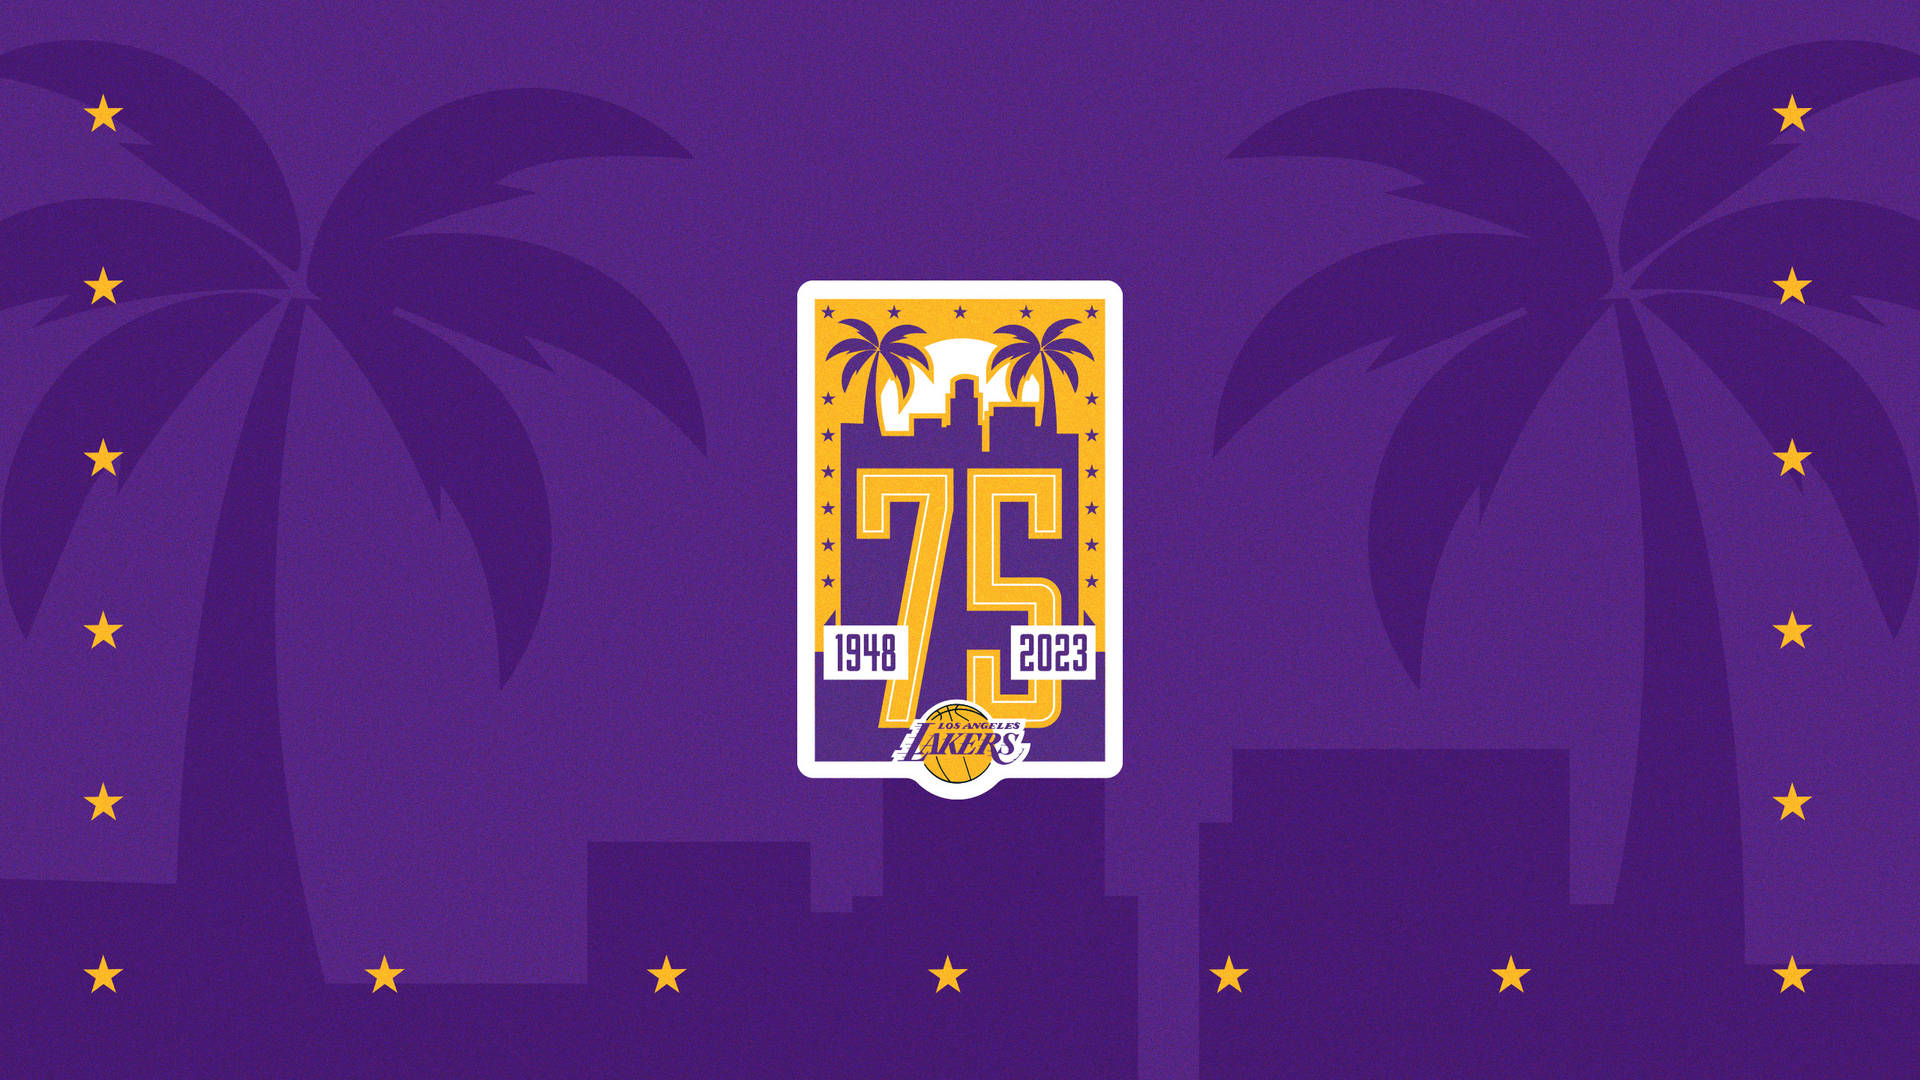 Los Angeles Lakers 75 Years Background